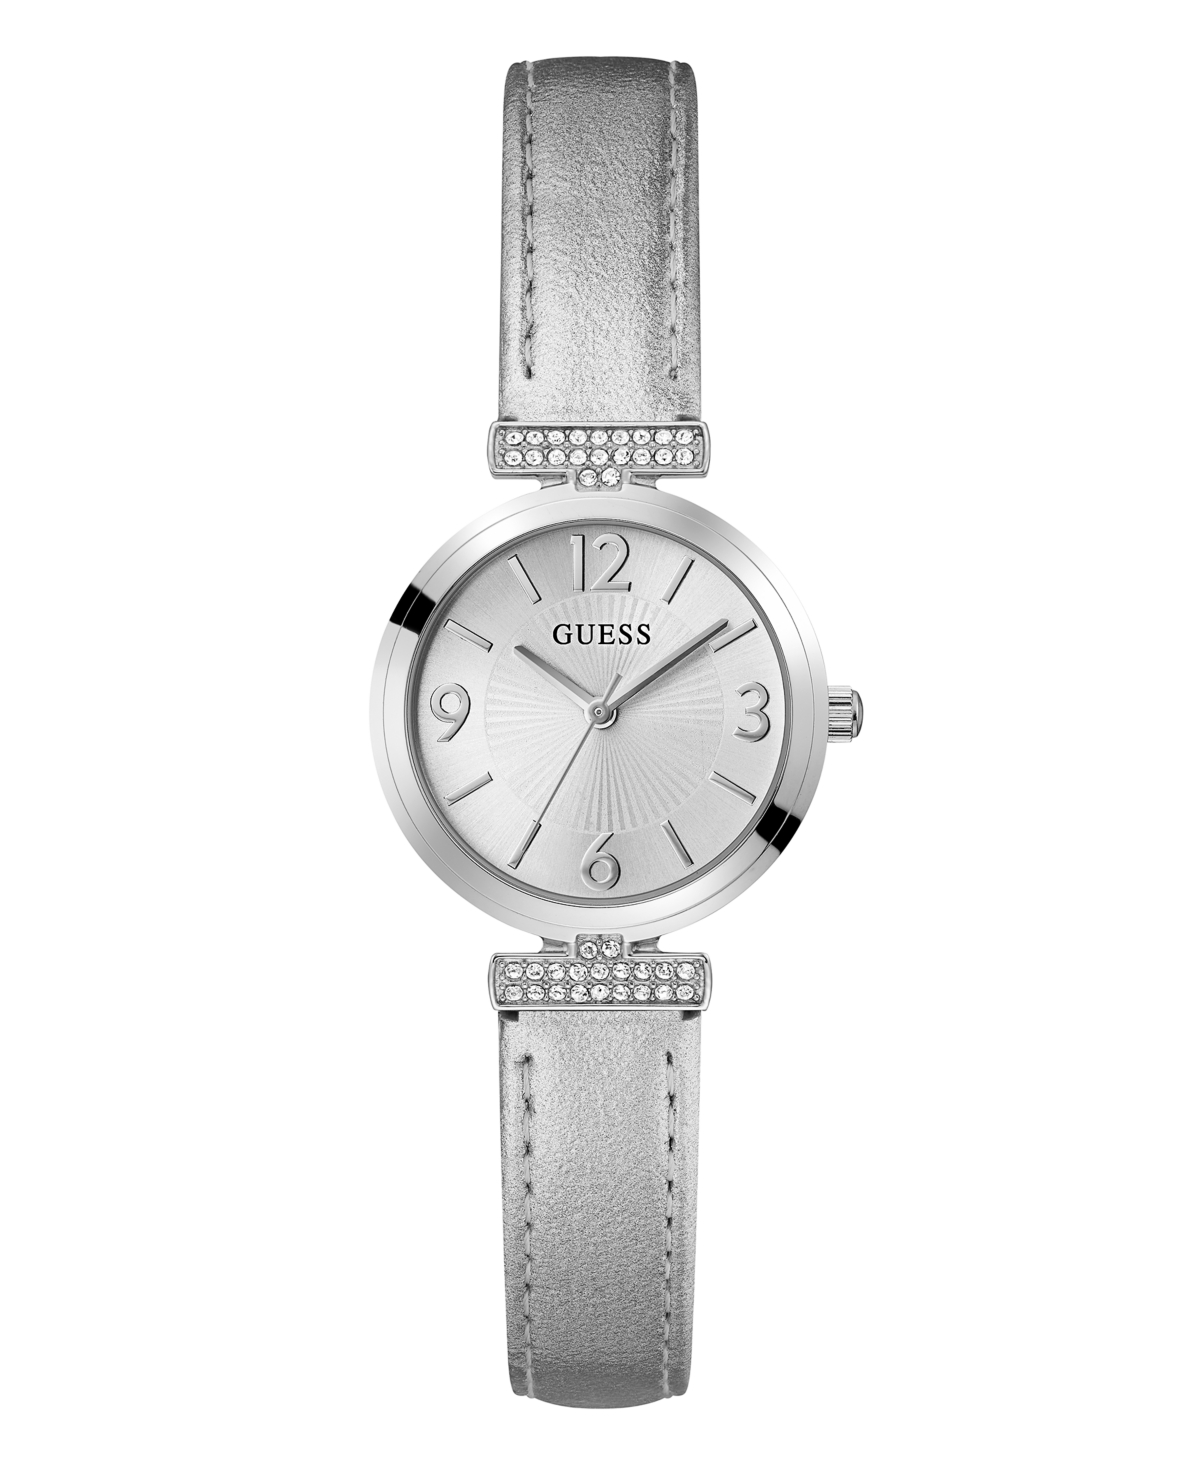 Guess Women's Analog Silver-tone Leather Watch 28mm